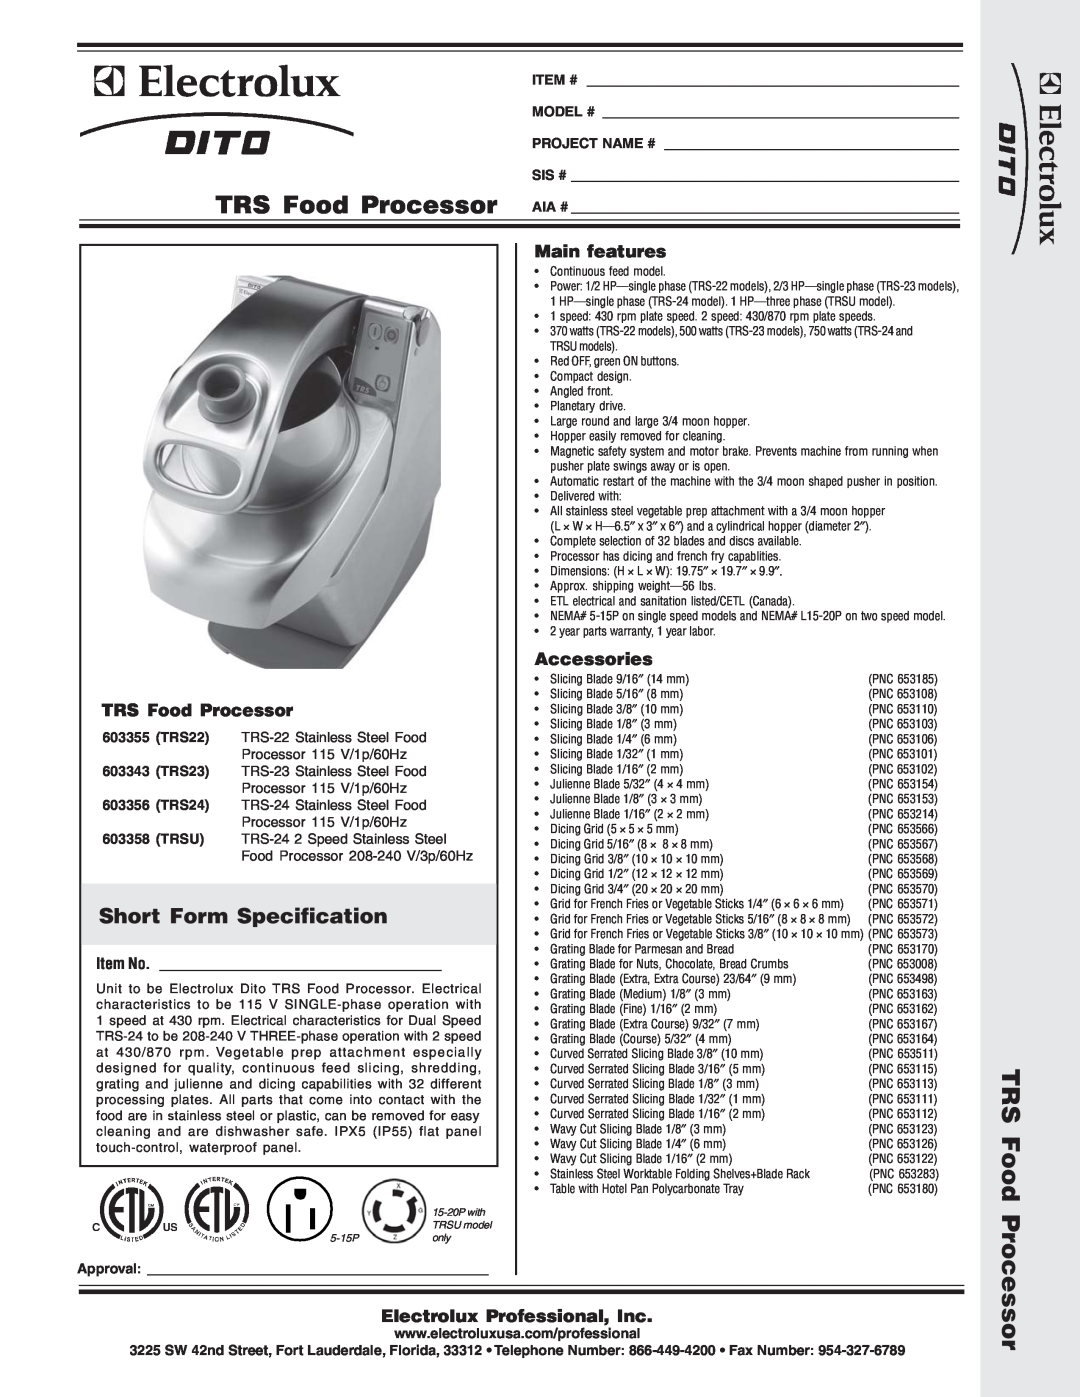 Electrolux TRS24 dimensions Short Form Specification, TRS Food Processor, Main features, Accessories, Item No, Approval 